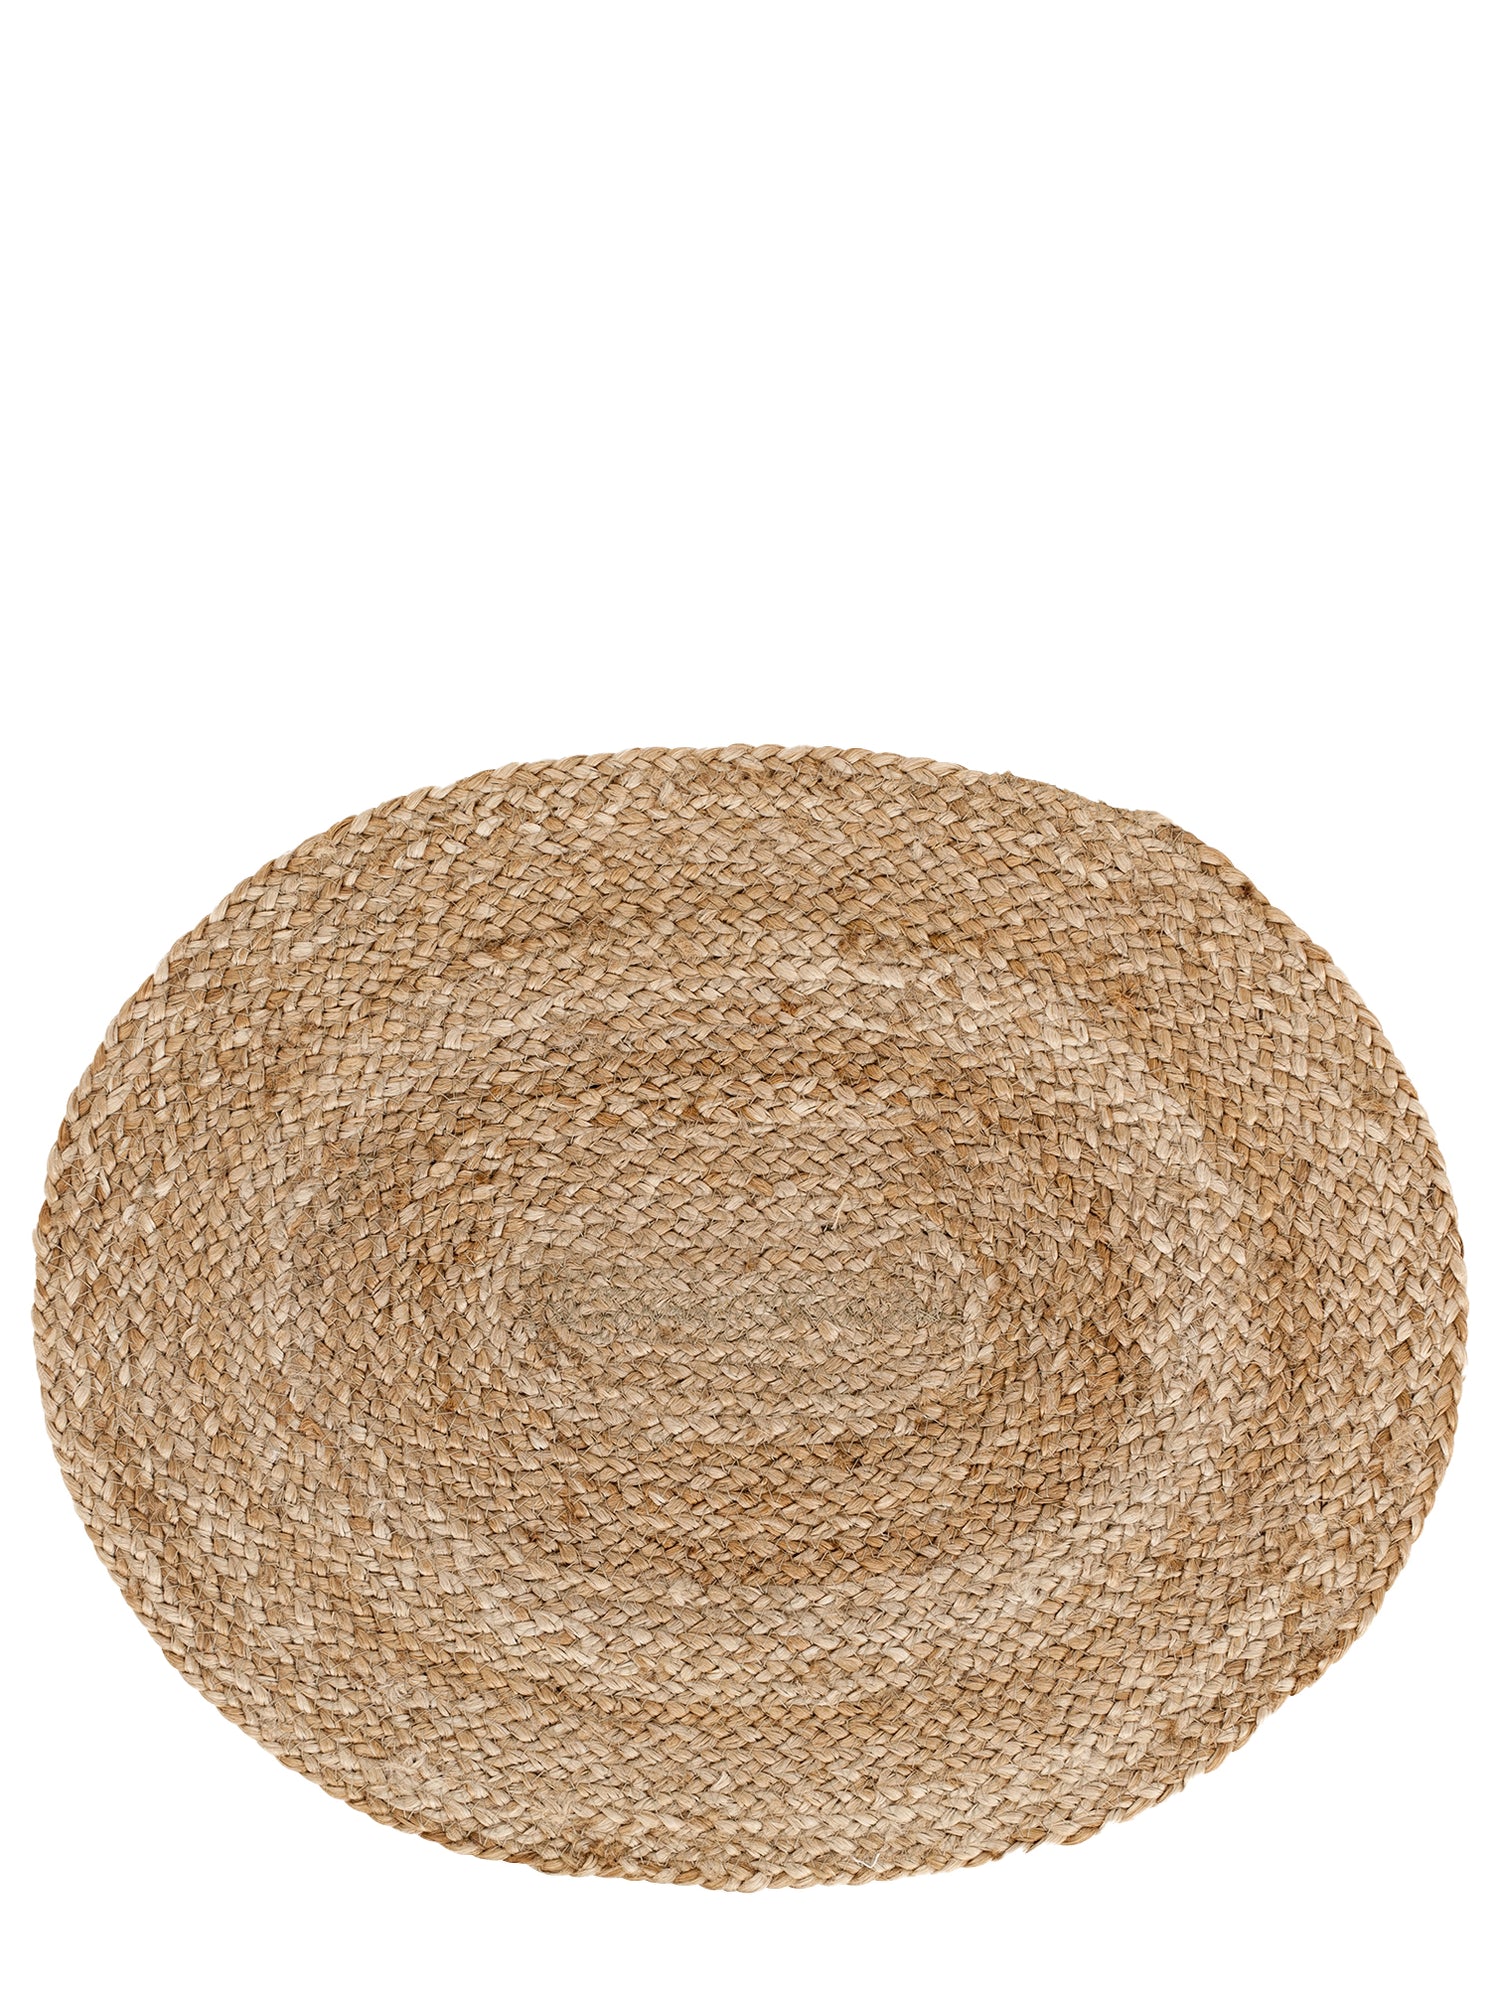 Oval braided placemat Elin, natural